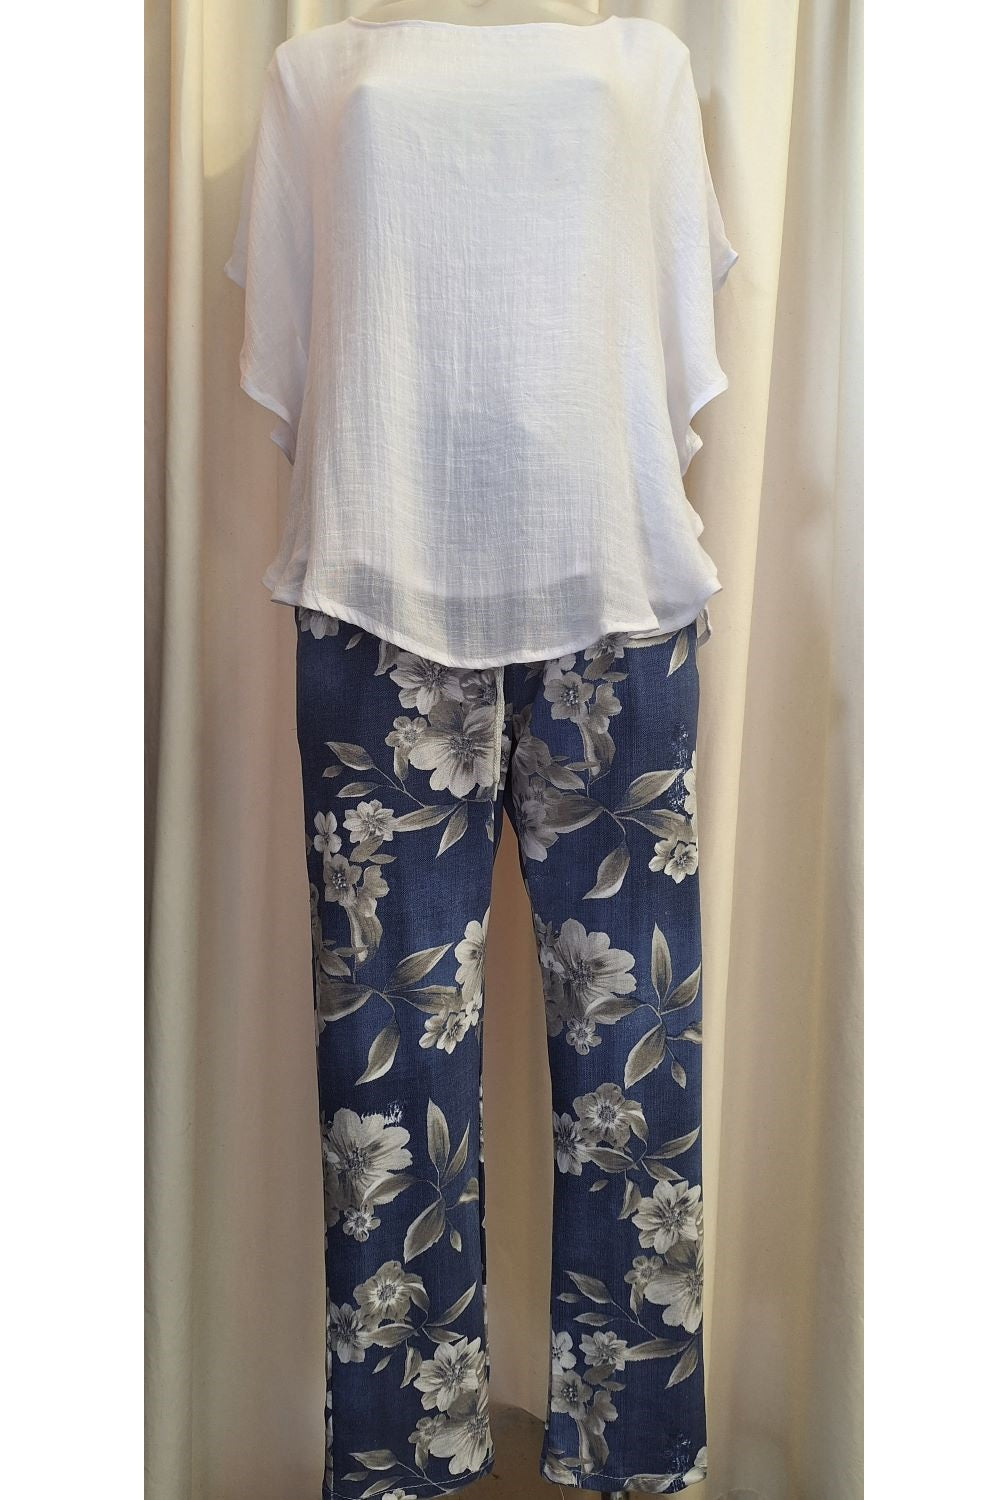 Italian Stretch Pants - Denim, White and Charcoal Flowers